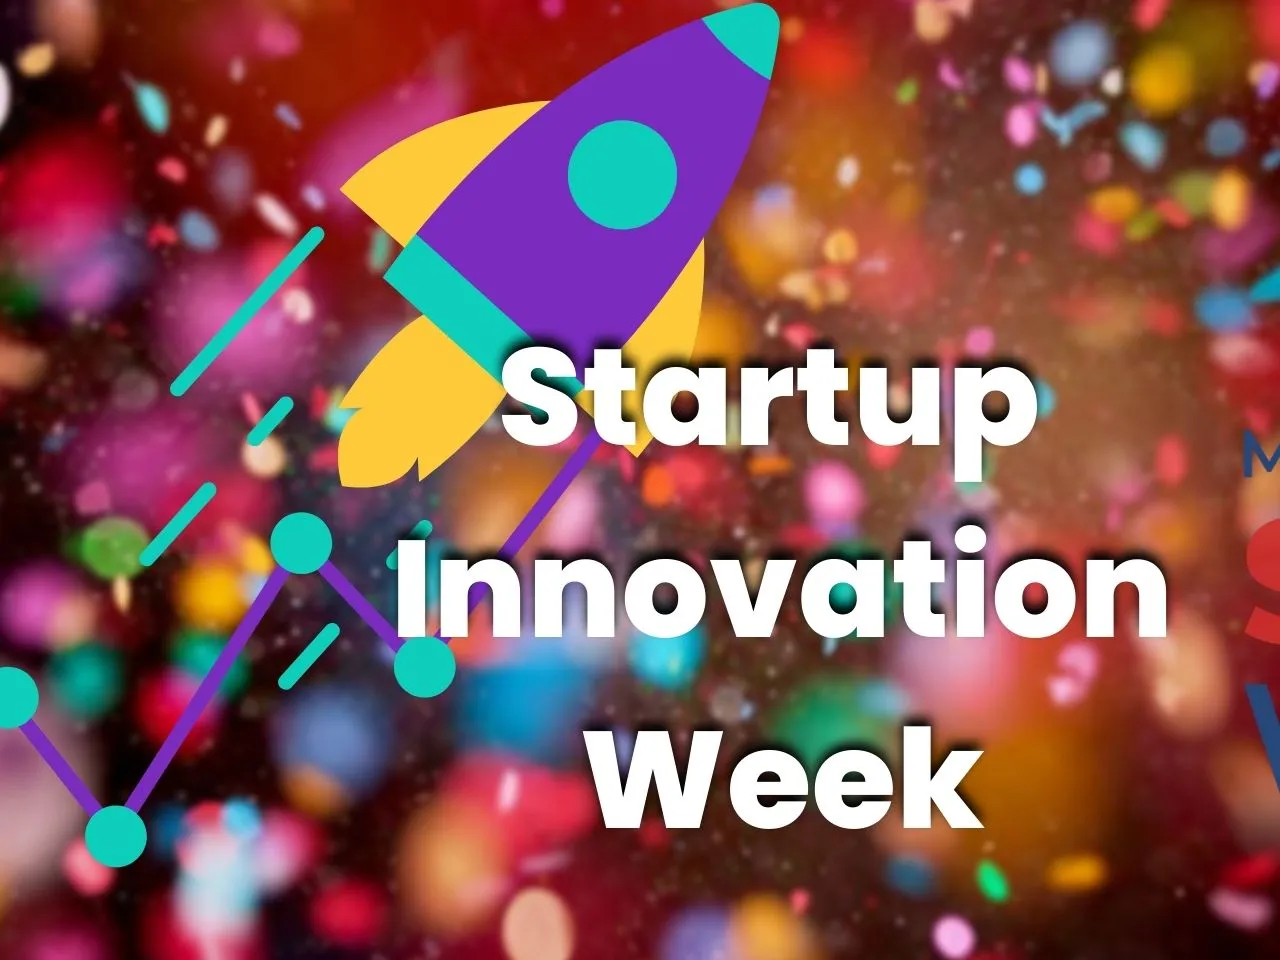 Startup India Innovation Week kick-starts with events across India